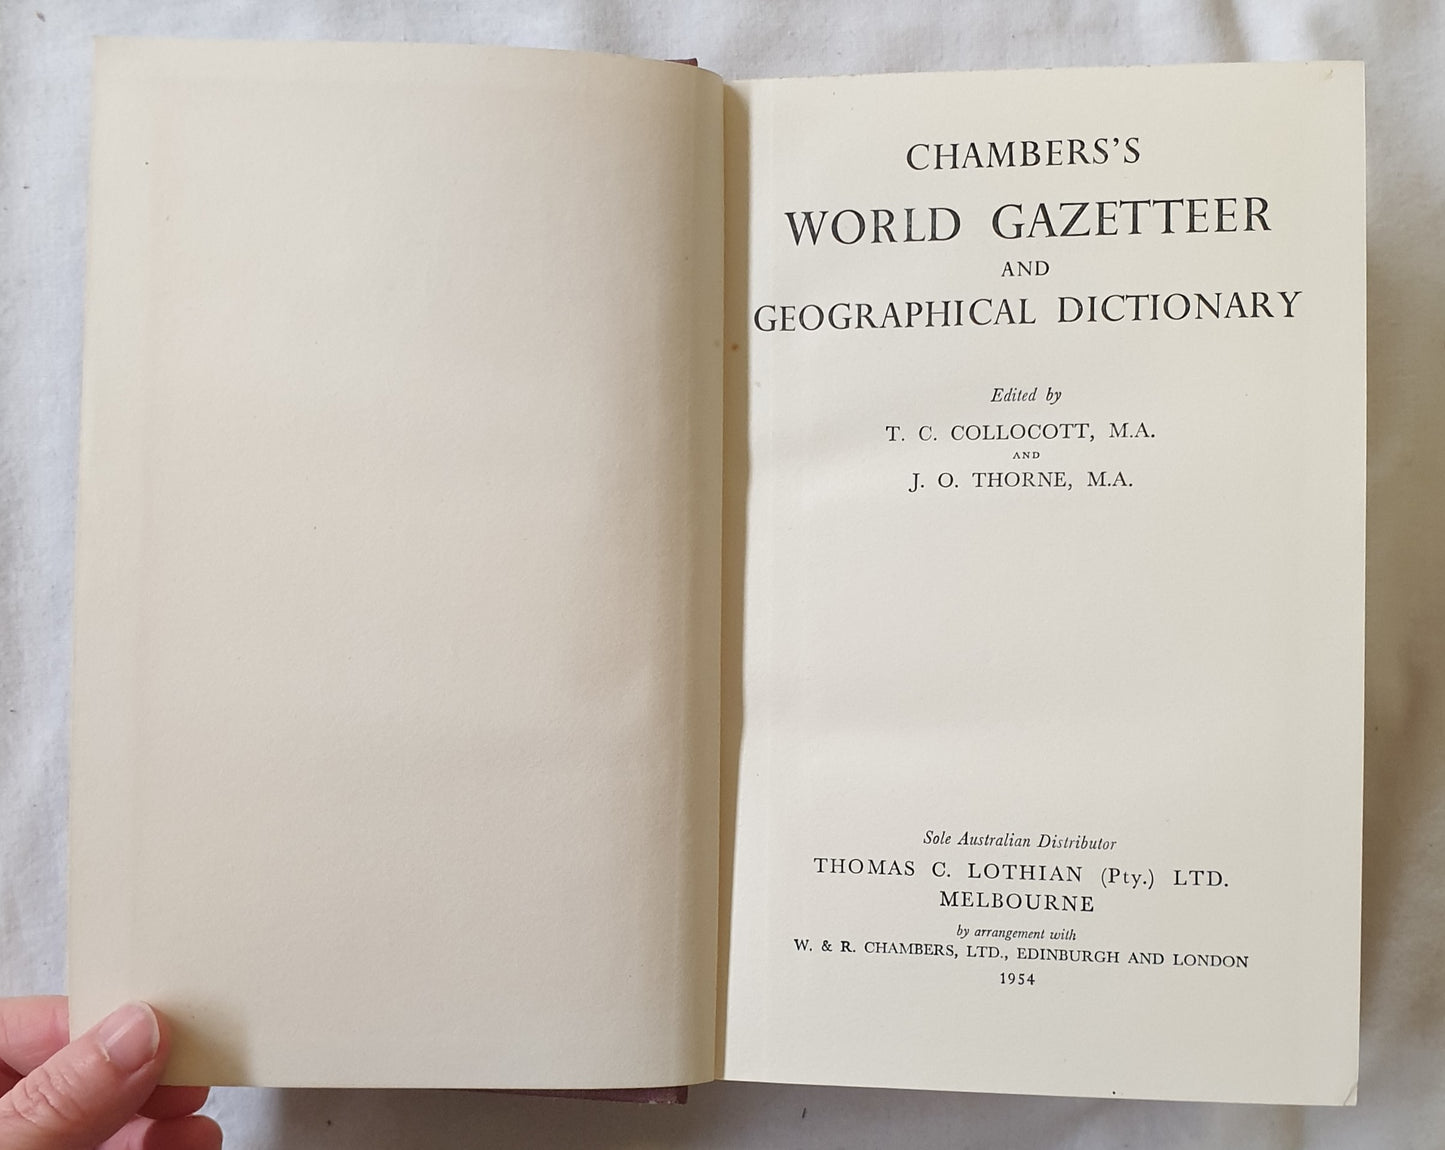 Chamber's World Gazetteer and Geographical Dictionary by Collocott and Thorne